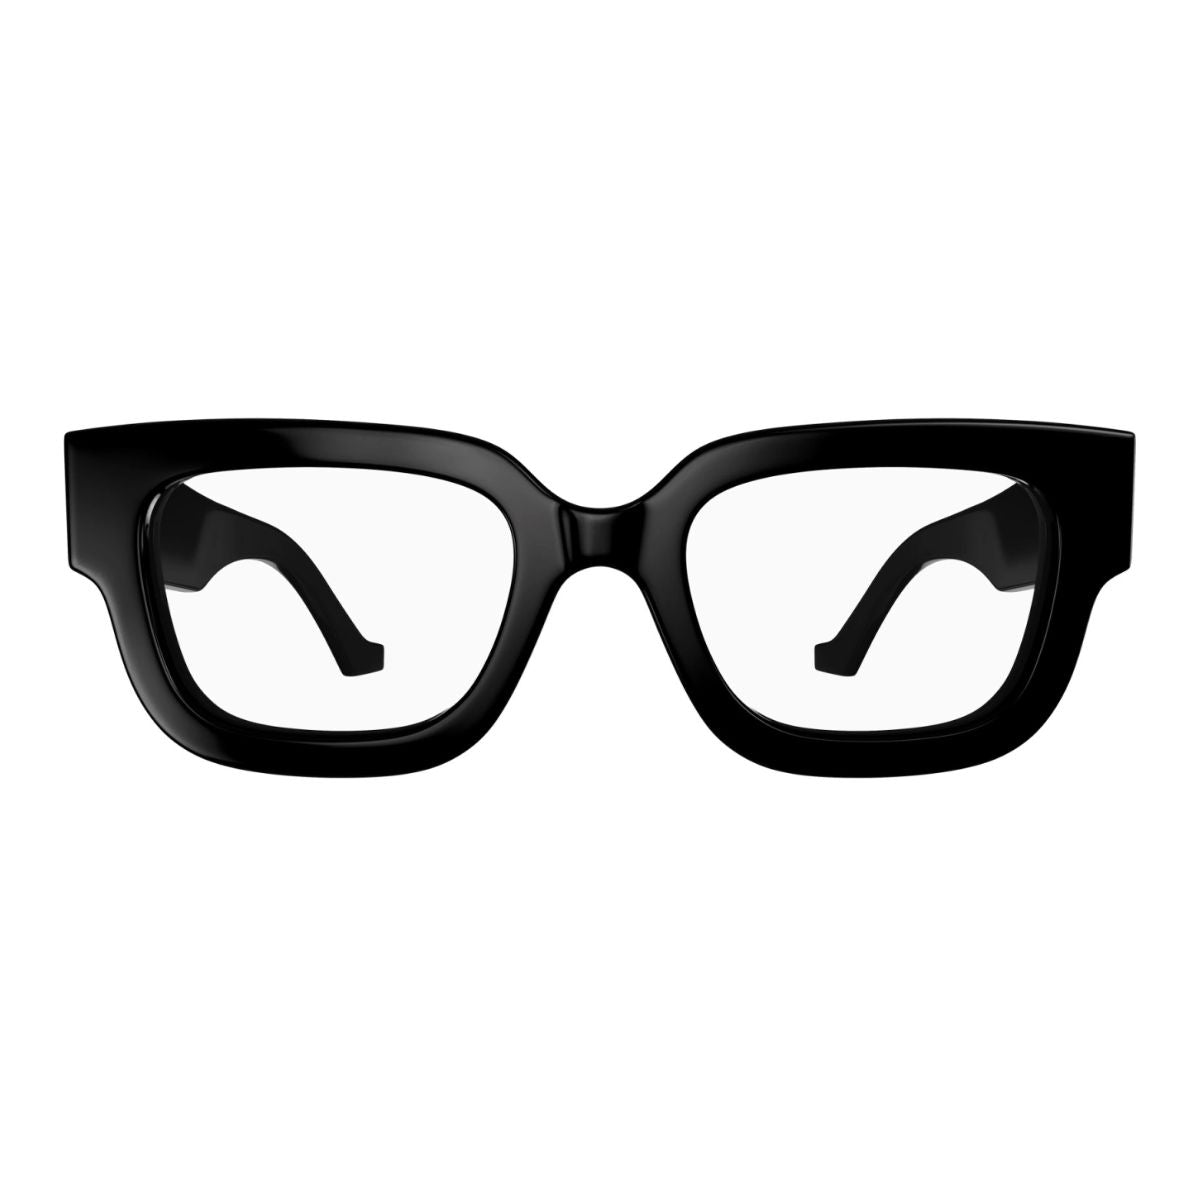 "Gucci 1548O 001 Spectacles - Blend of fashion, function, and sophistication in these frames."